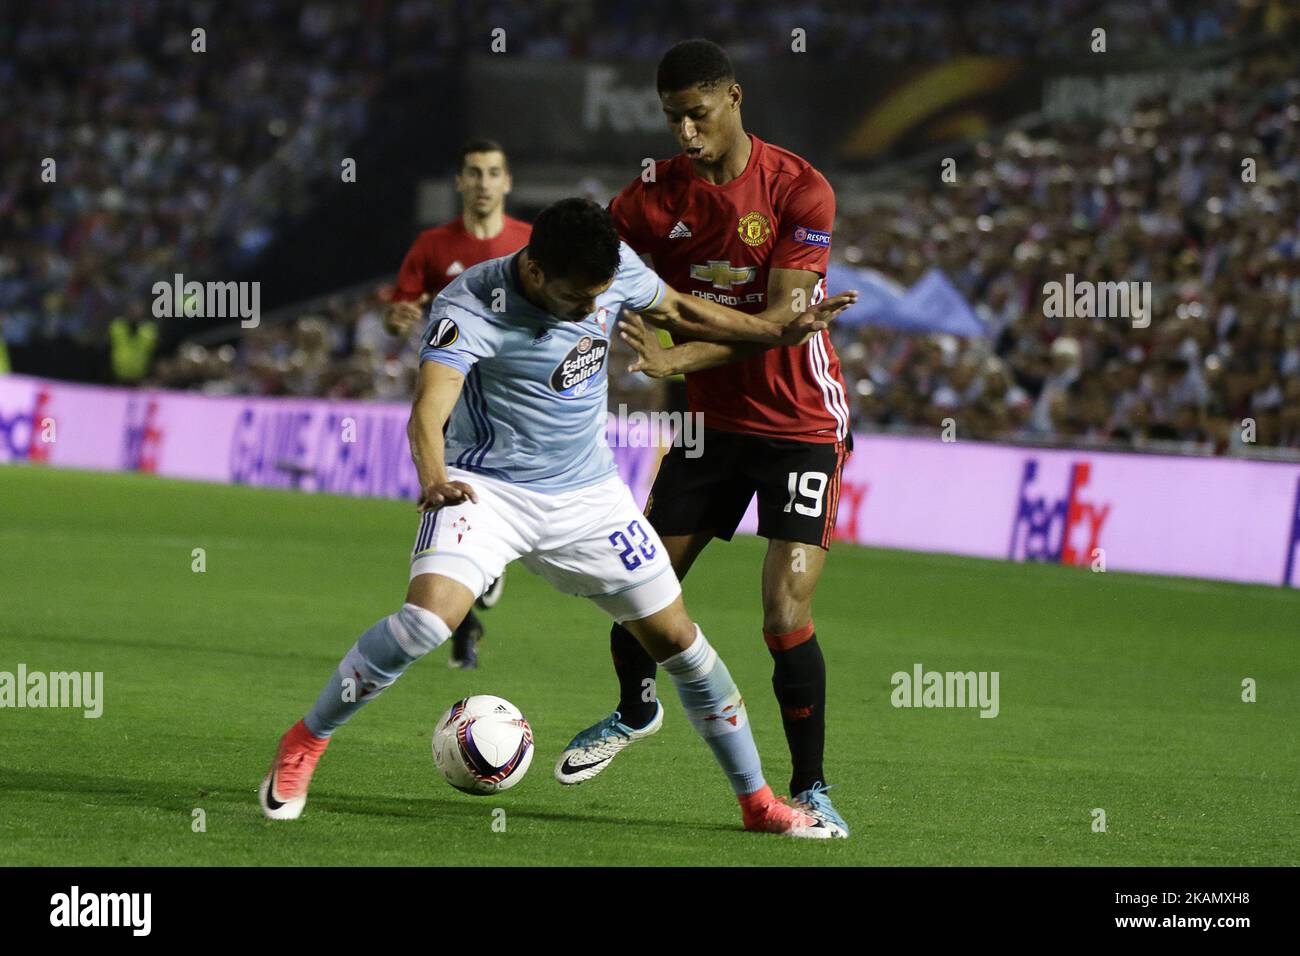 Marcus Rashford forward of Manchester United (19) battles for the ball with Gustavo Cabral defender of Celta de Vigo (22) during the UEFA Europe League Round of 2 first leg match between Celta de Vigo and Manchester United at Balaidos Stadium on May 4, 2017 in Vigo, Spain. (Photo by Jose Manuel Alvarez Rey/NurPhoto) *** Please Use Credit from Credit Field *** Stock Photo